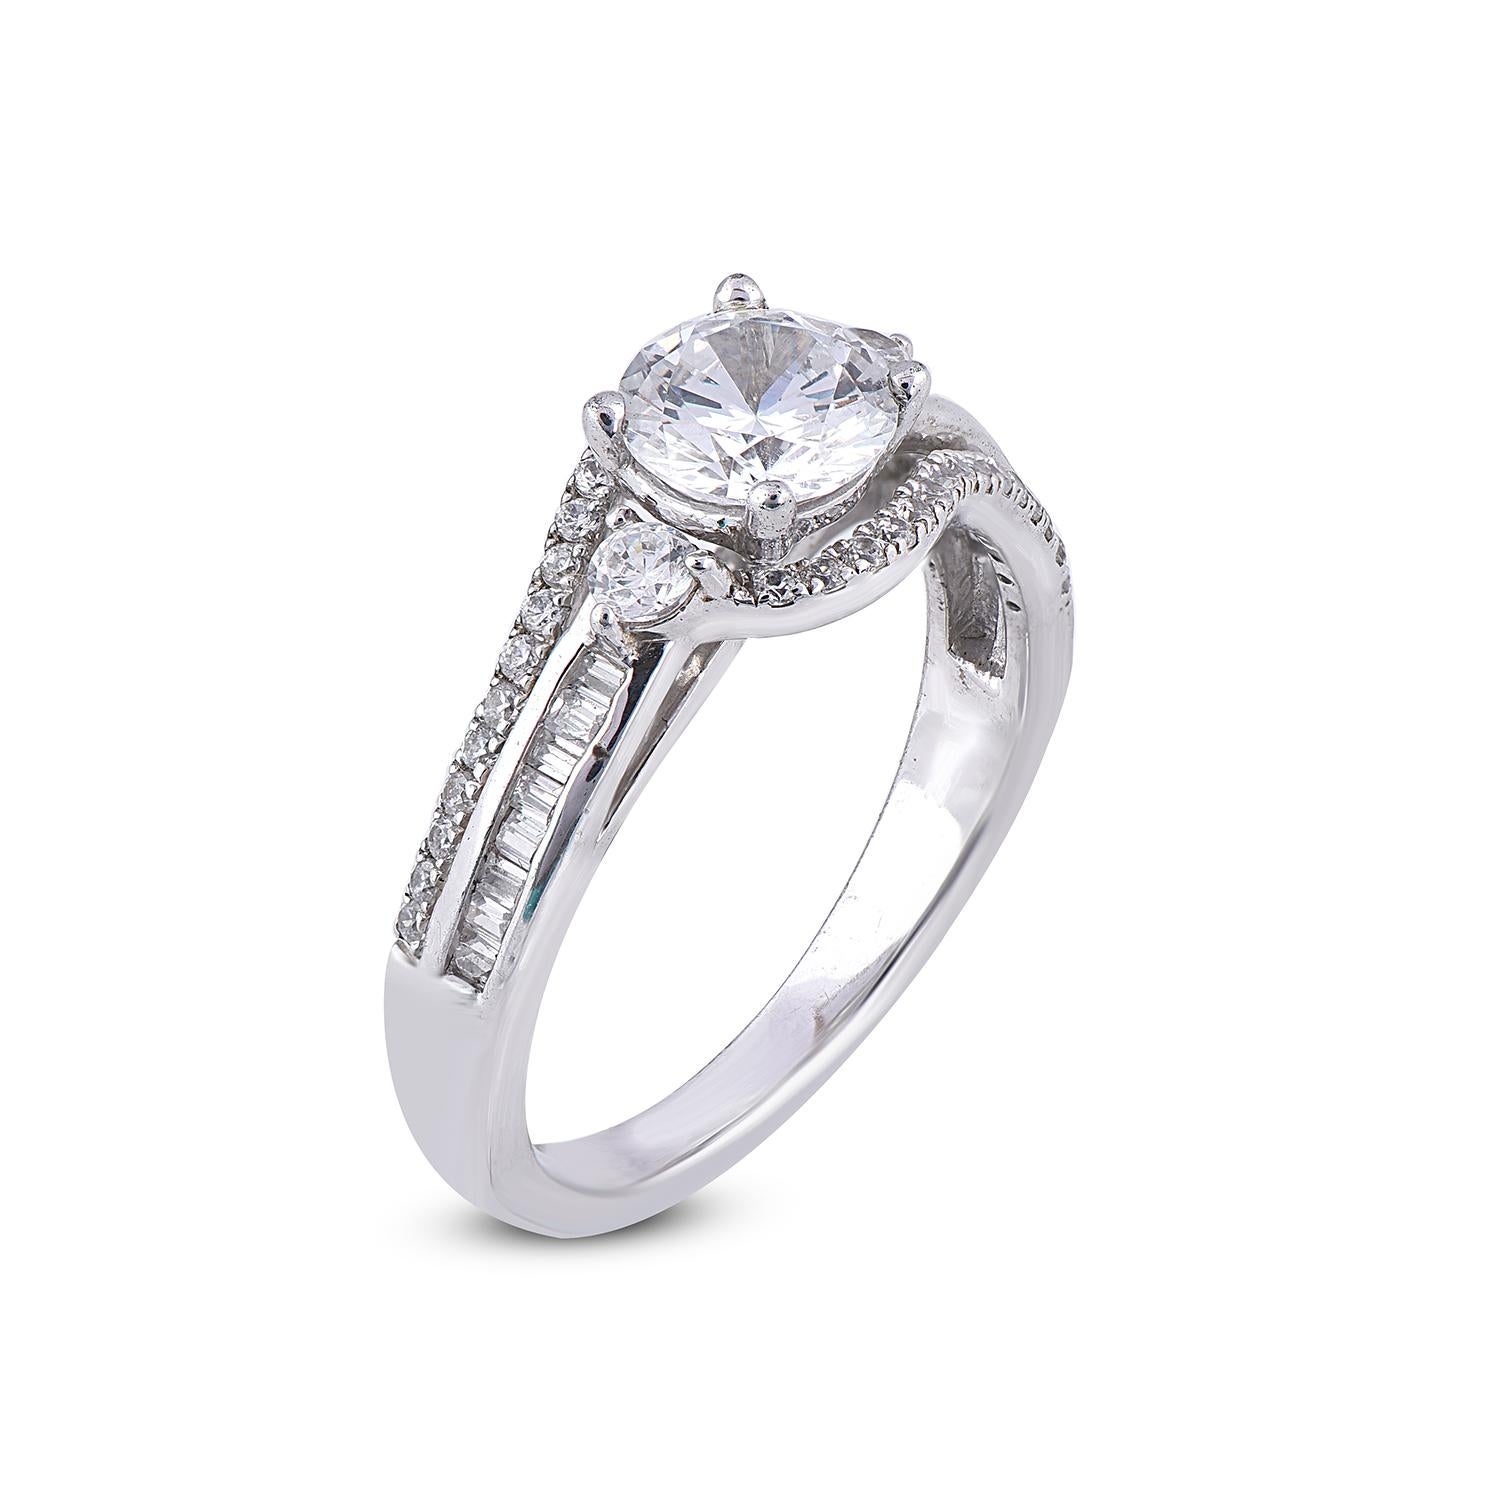 Truly exquisite, this entangled design 18 Karat white gold diamond engagement ring is sure to be admired for the inherent classic beauty and elegance within its design. This engagement ring features 1.00 ct of centre stone and 0.50 ct of shank lined